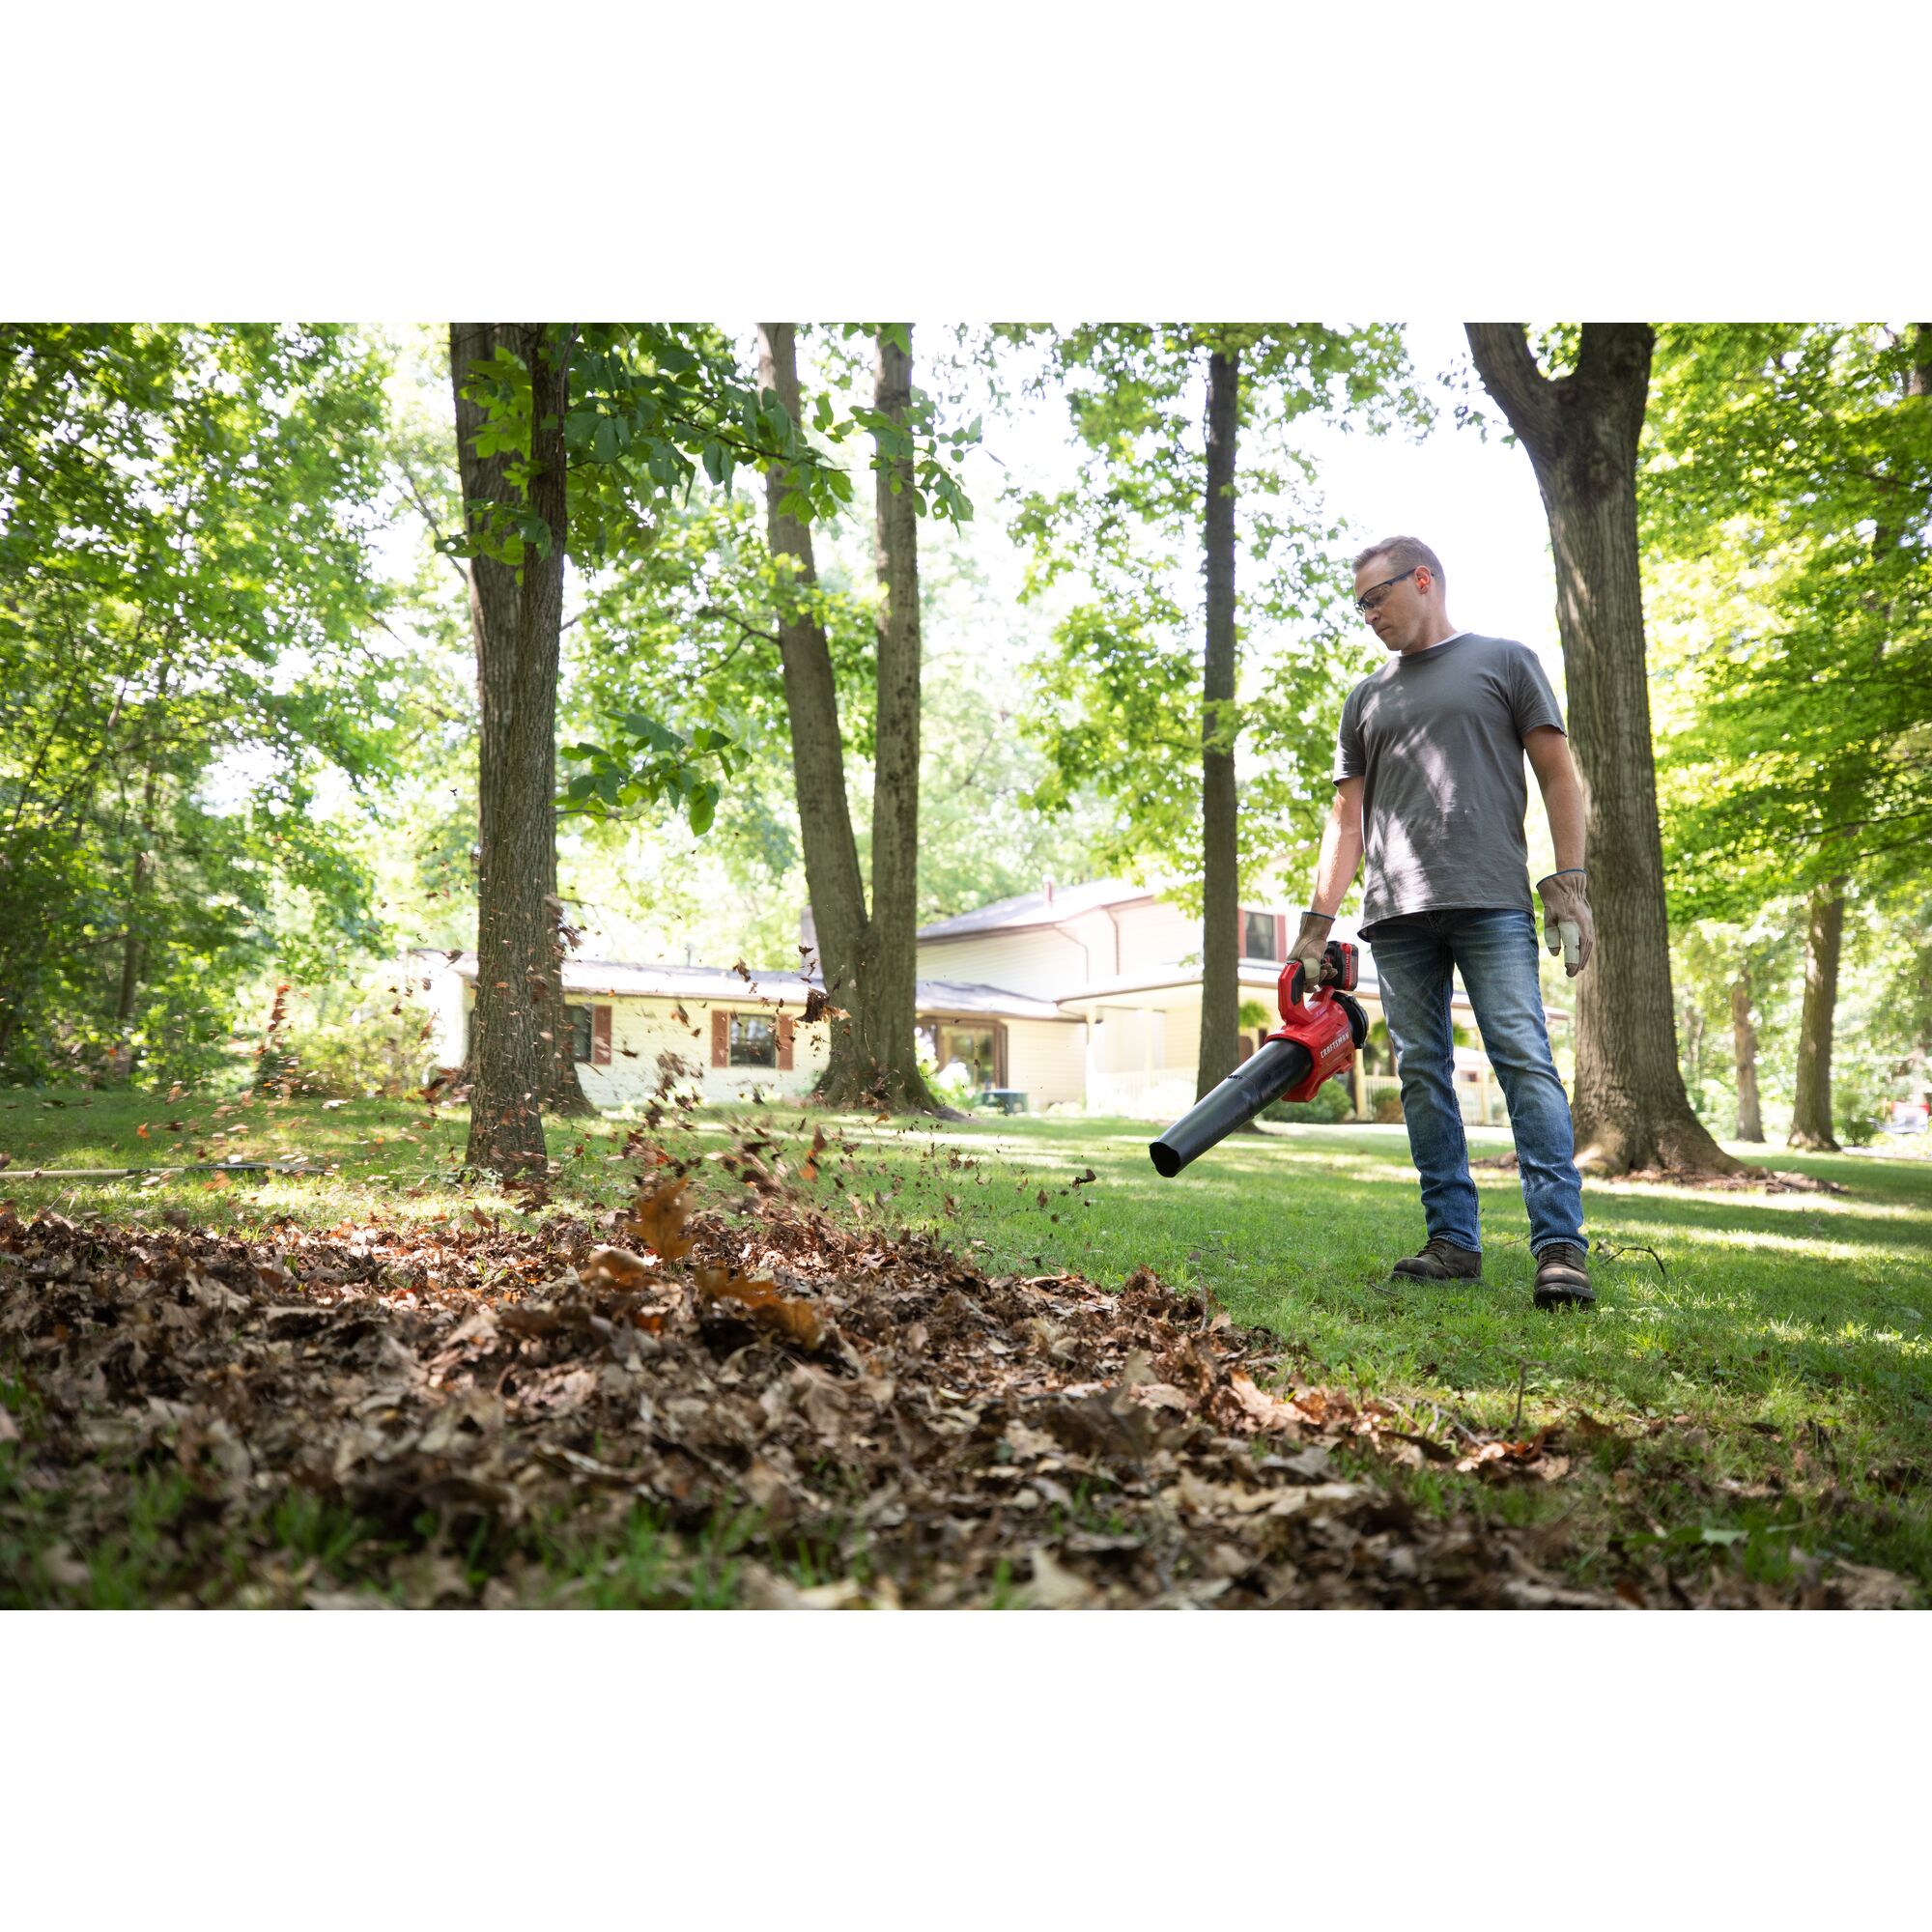 CRAFTSMAN V20 BRUSHLESSRP Blower clearing leaves off grass in a wooded area with tree coverage